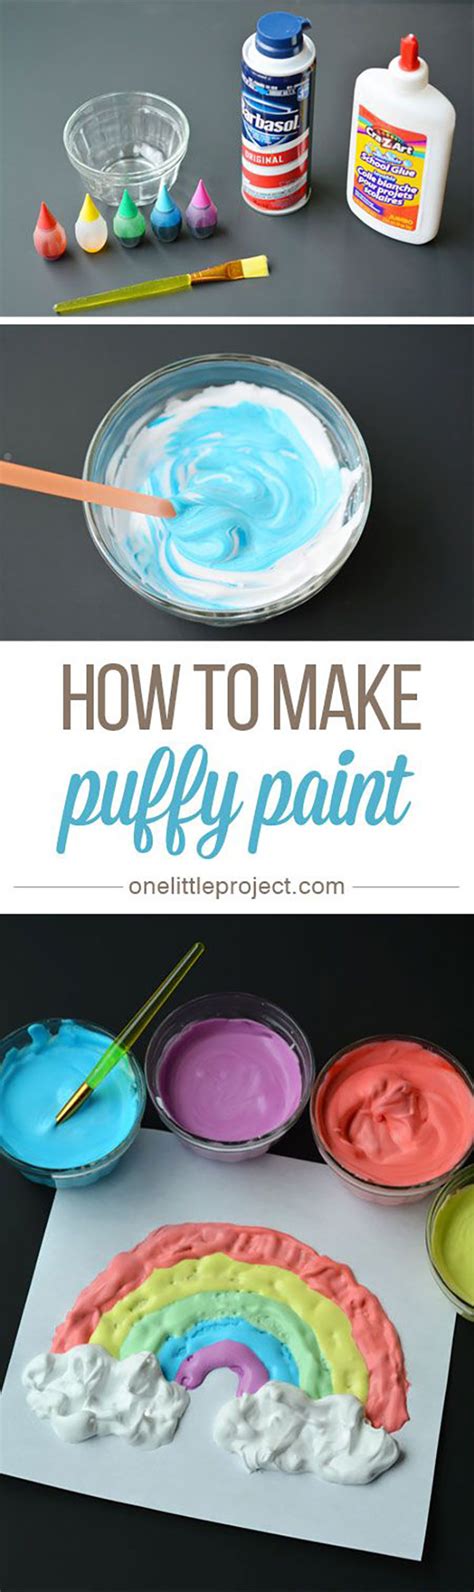 21 Diy Paint Recipes To Make For The Kids